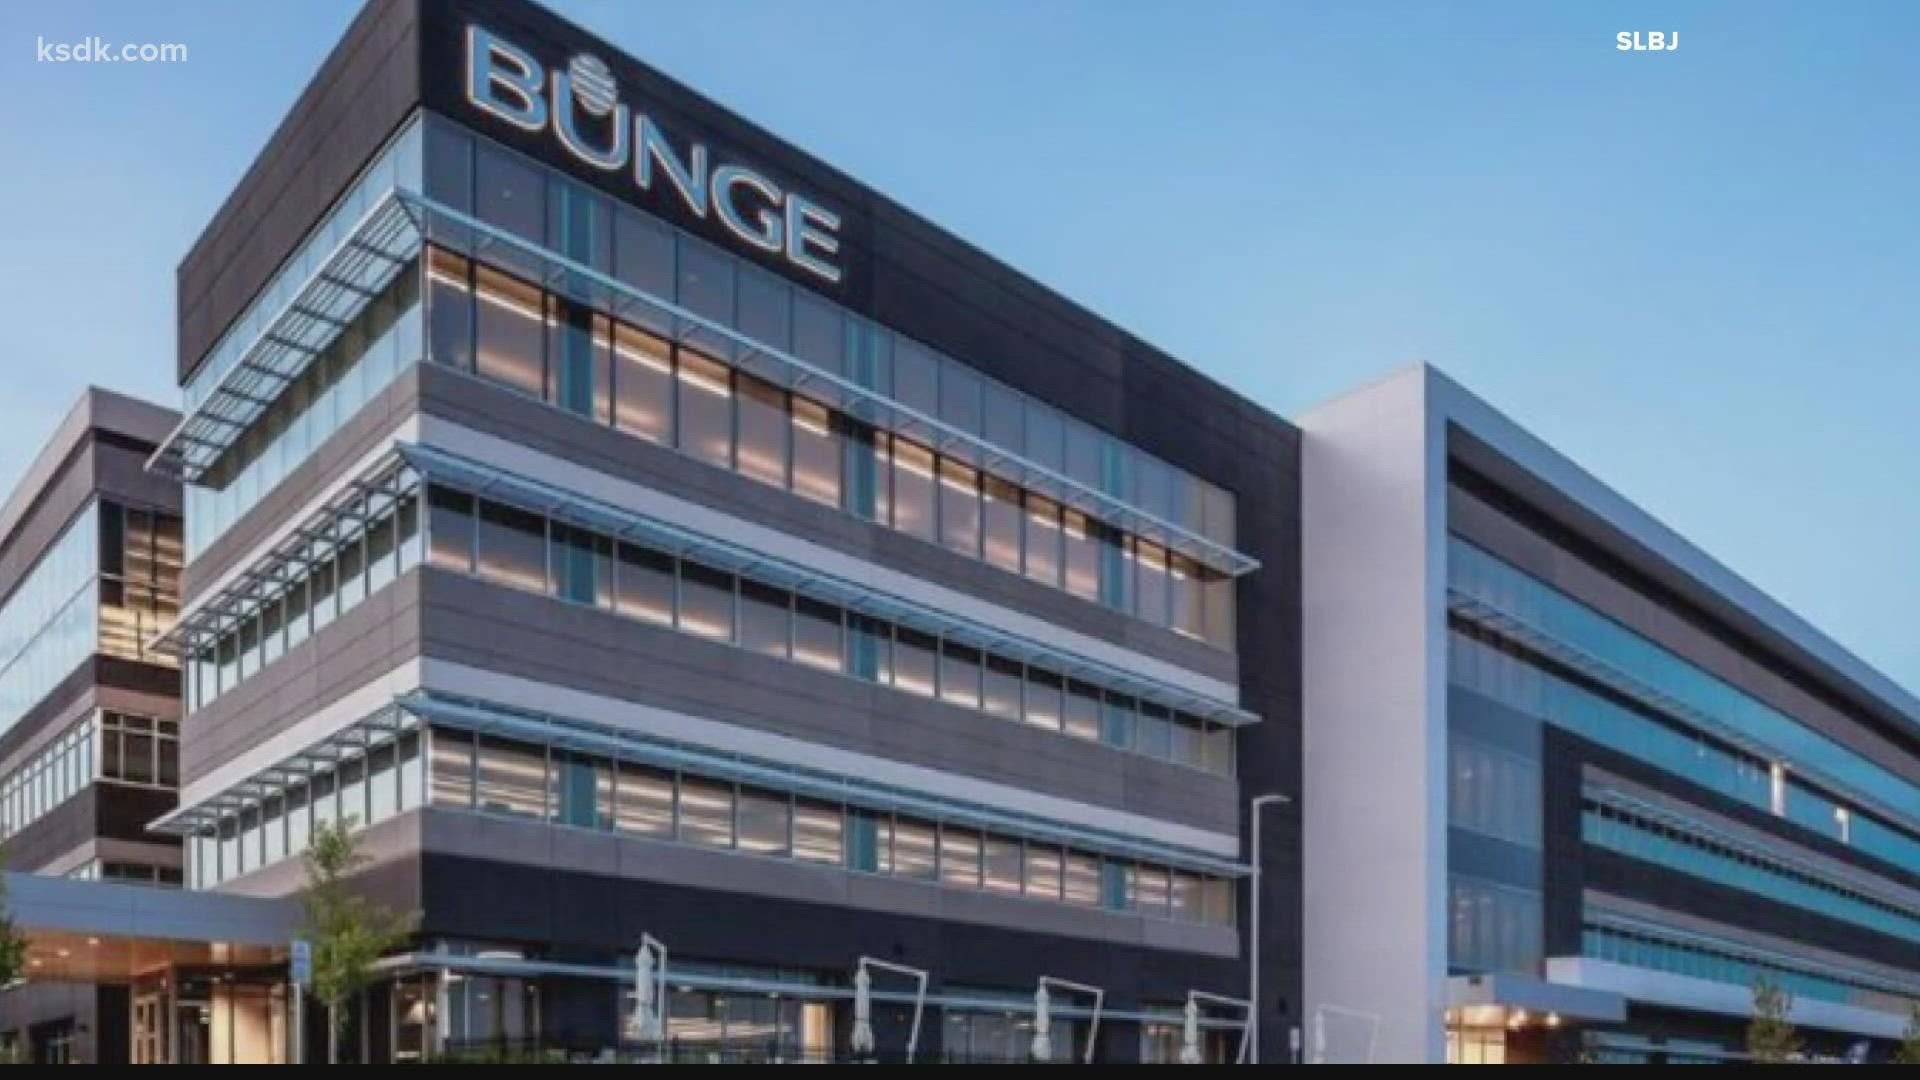 According to our partners at the St. Louis Business Journal, Bunge has closed its office and facilities in Ukraine. Bunge has about 1,000 employees in Ukraine.